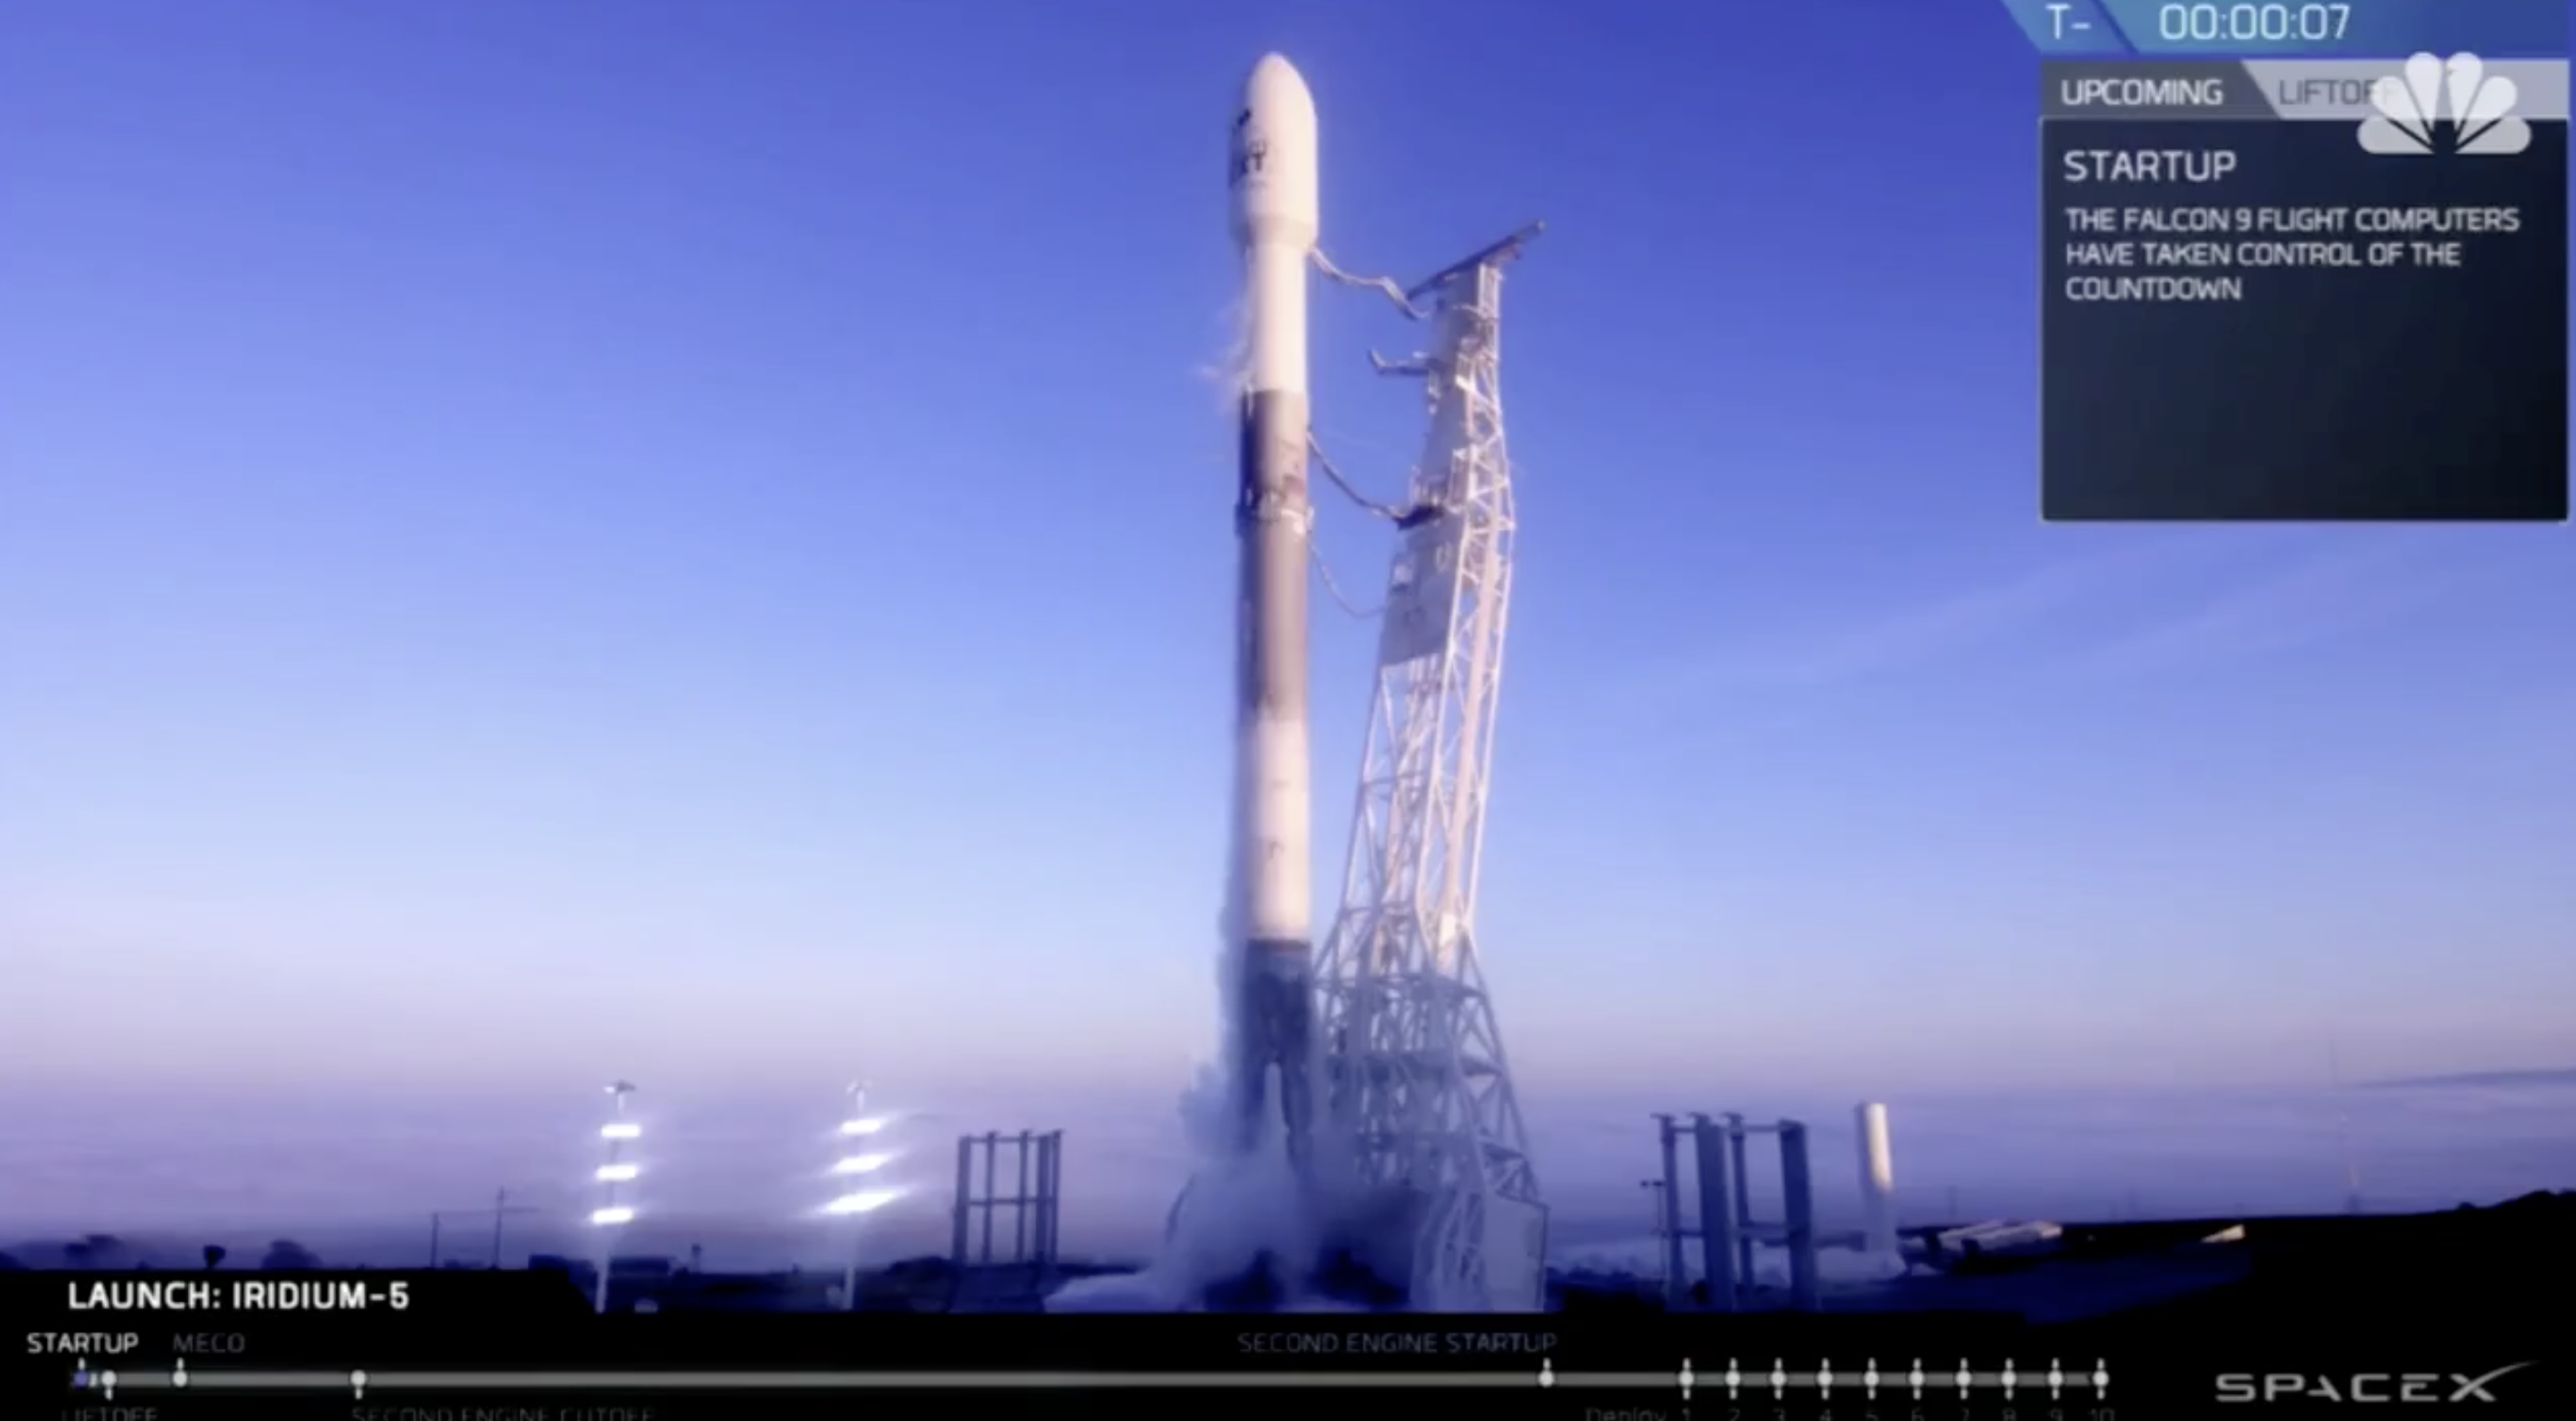 SpaceX launched a Falcon 9 rocket Friday.